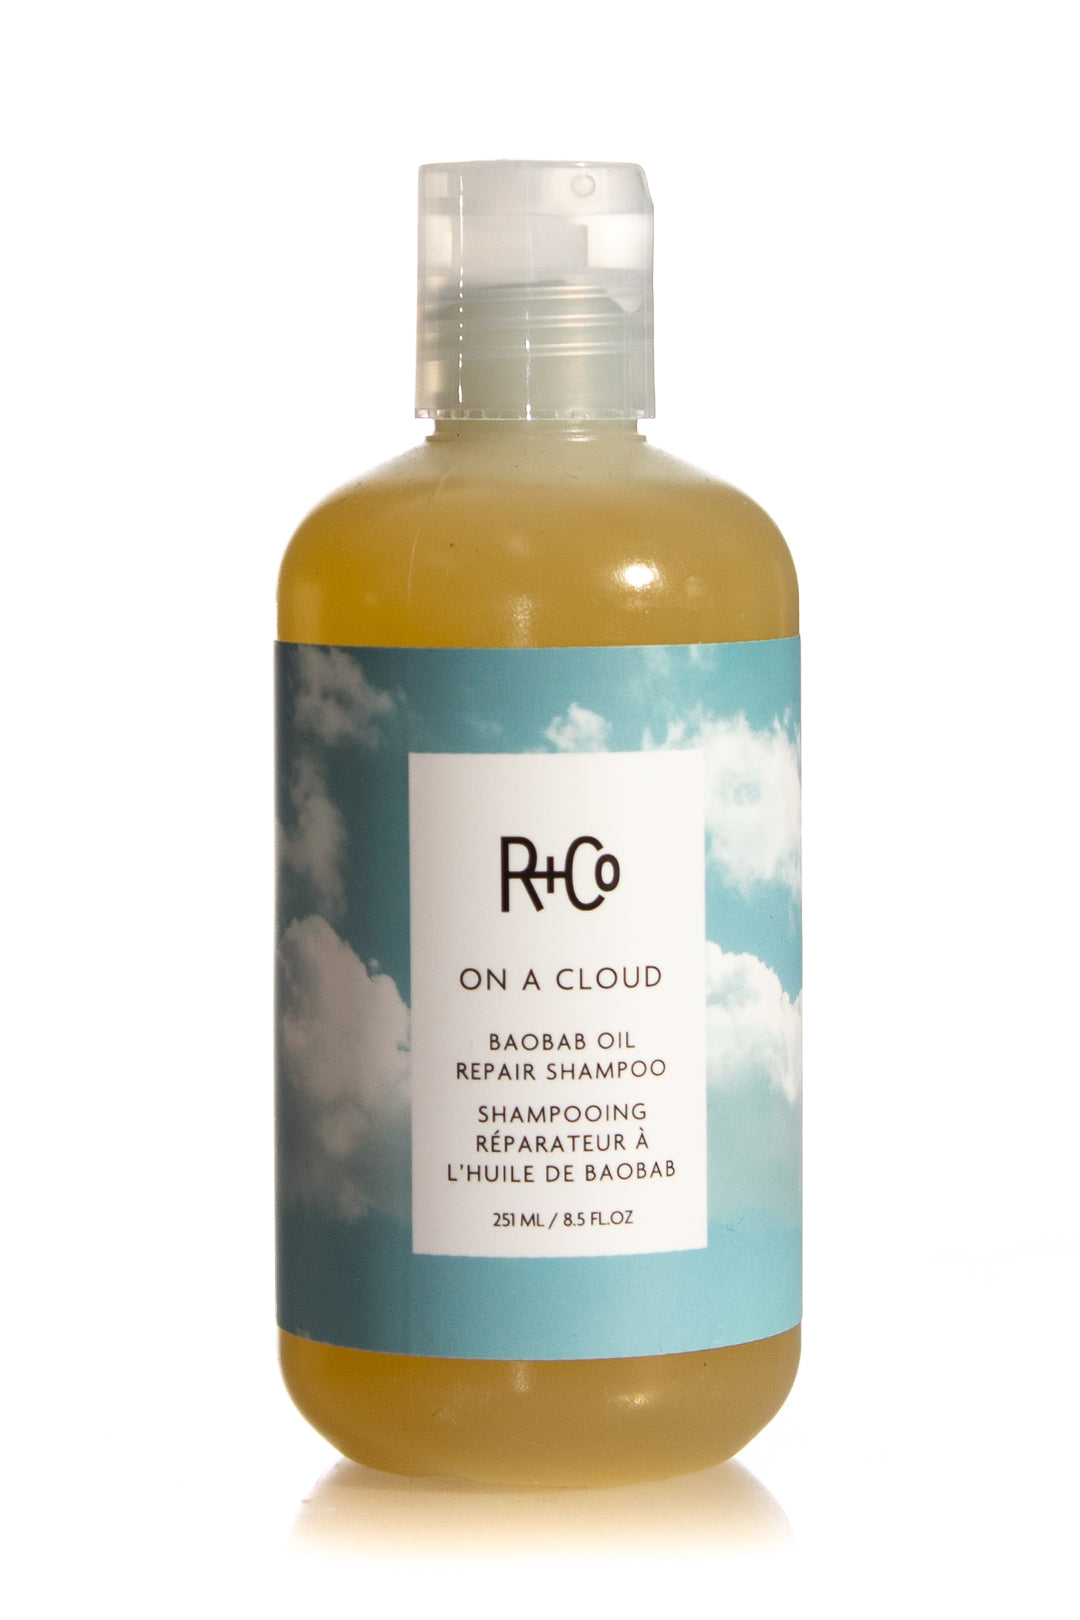 This luxe oil-protein shampoo provides the gentlest cleansing for hair damaged by chemical processes, excessive heat-tool use, styling and environmental aggressors. The repairing formula helps re-bond the hair’s inner structure as it cleanses, infusing hair with moisture, essential oils and caring ingredients.